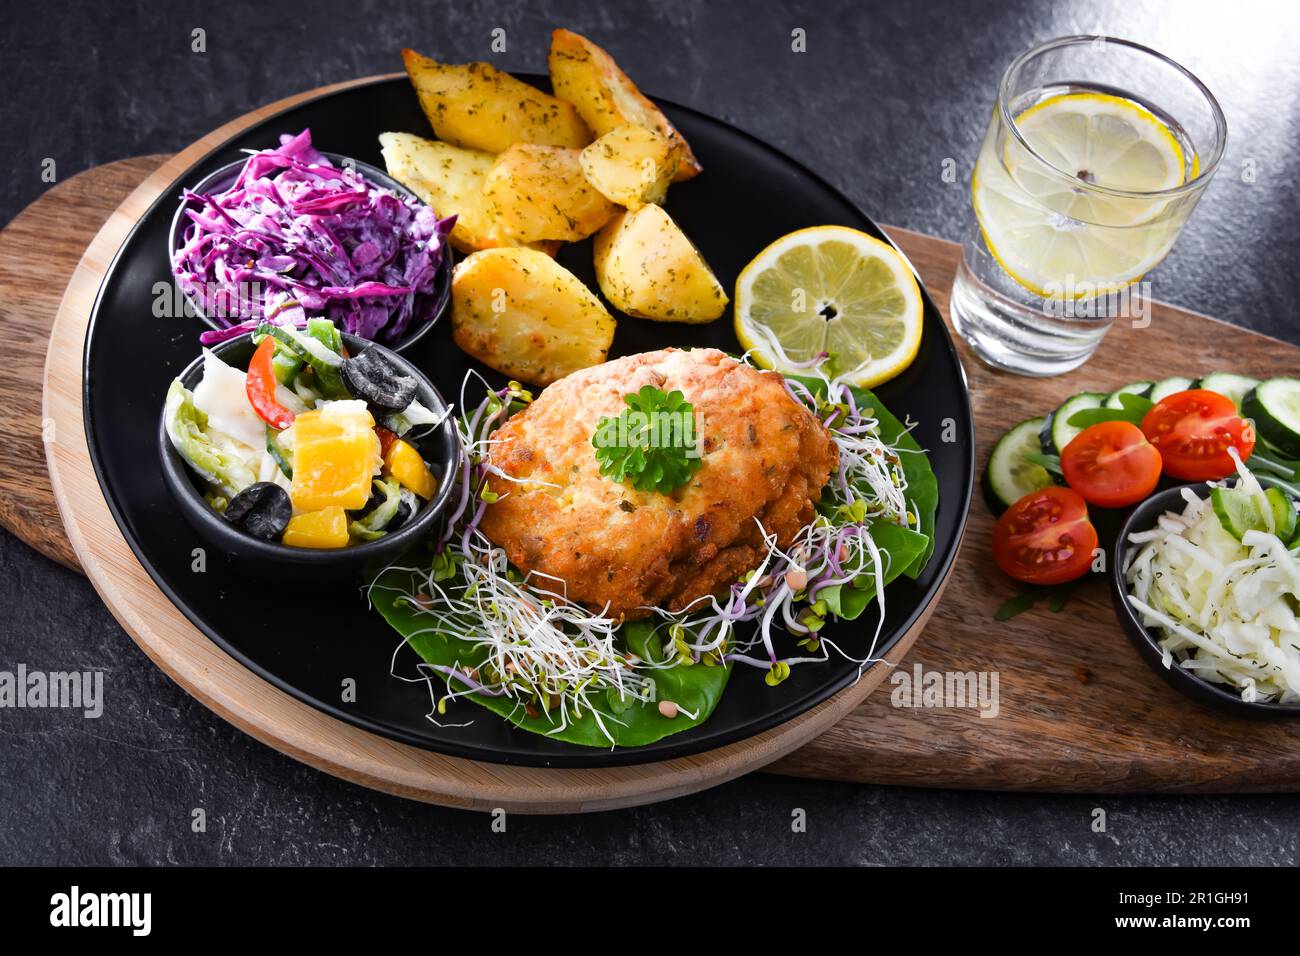 Pulled chicken cutlet coated with breadcrumbs with potatoes and vegetable salads Stock Photo